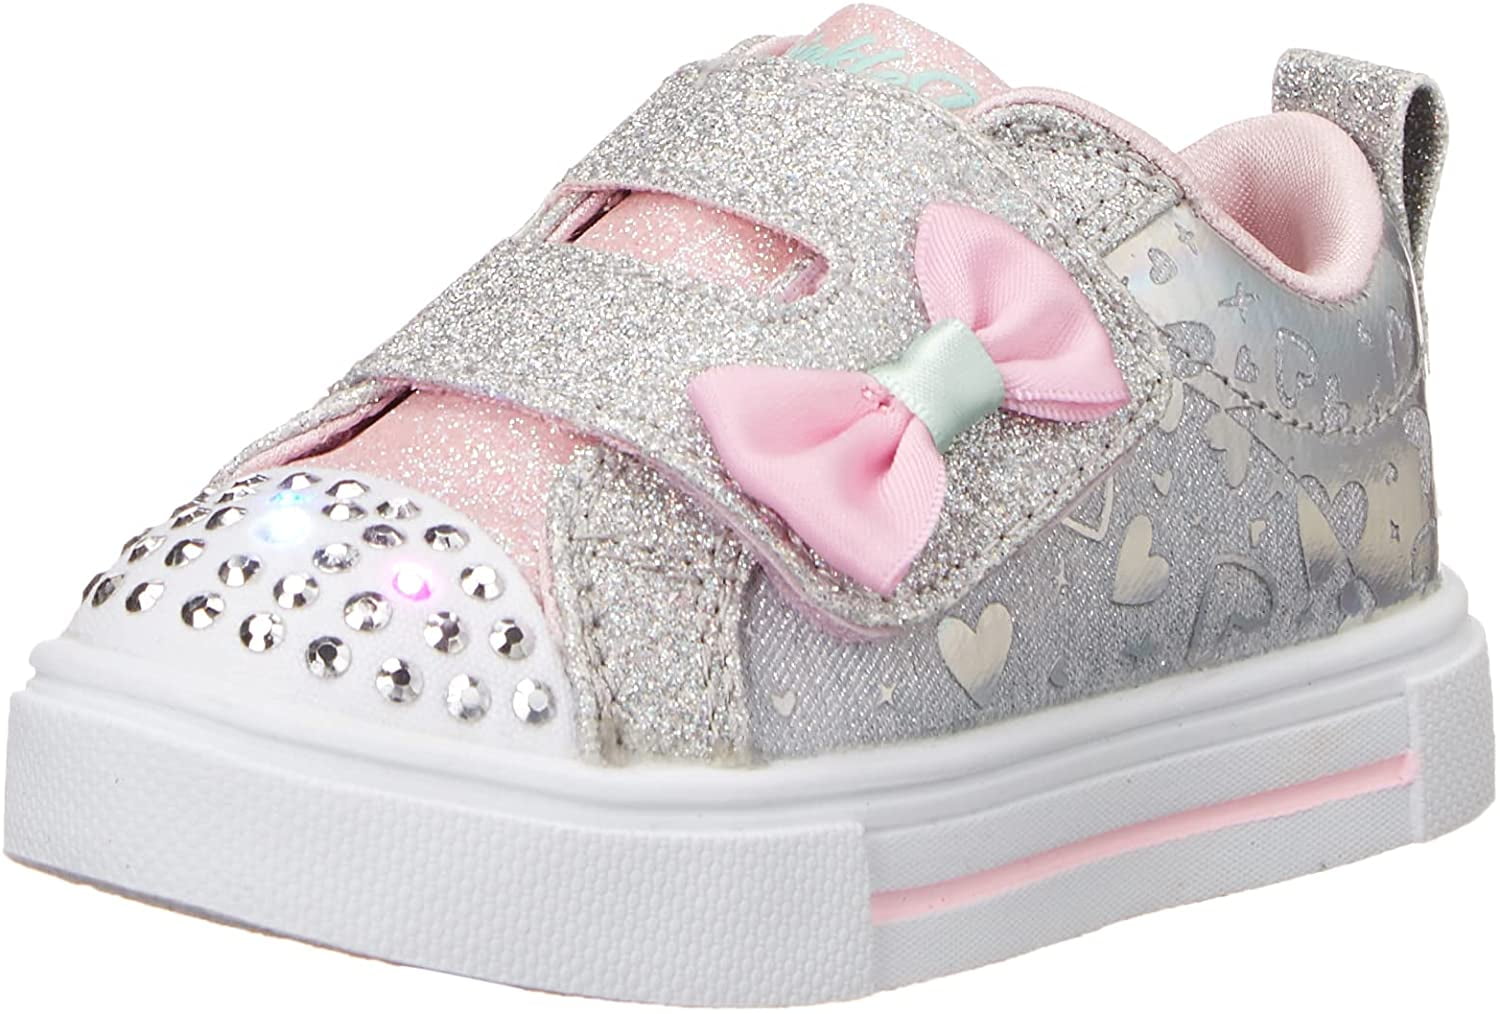 Mary-Jane Canvas Sneakers for Toddler Girls | Old Navy